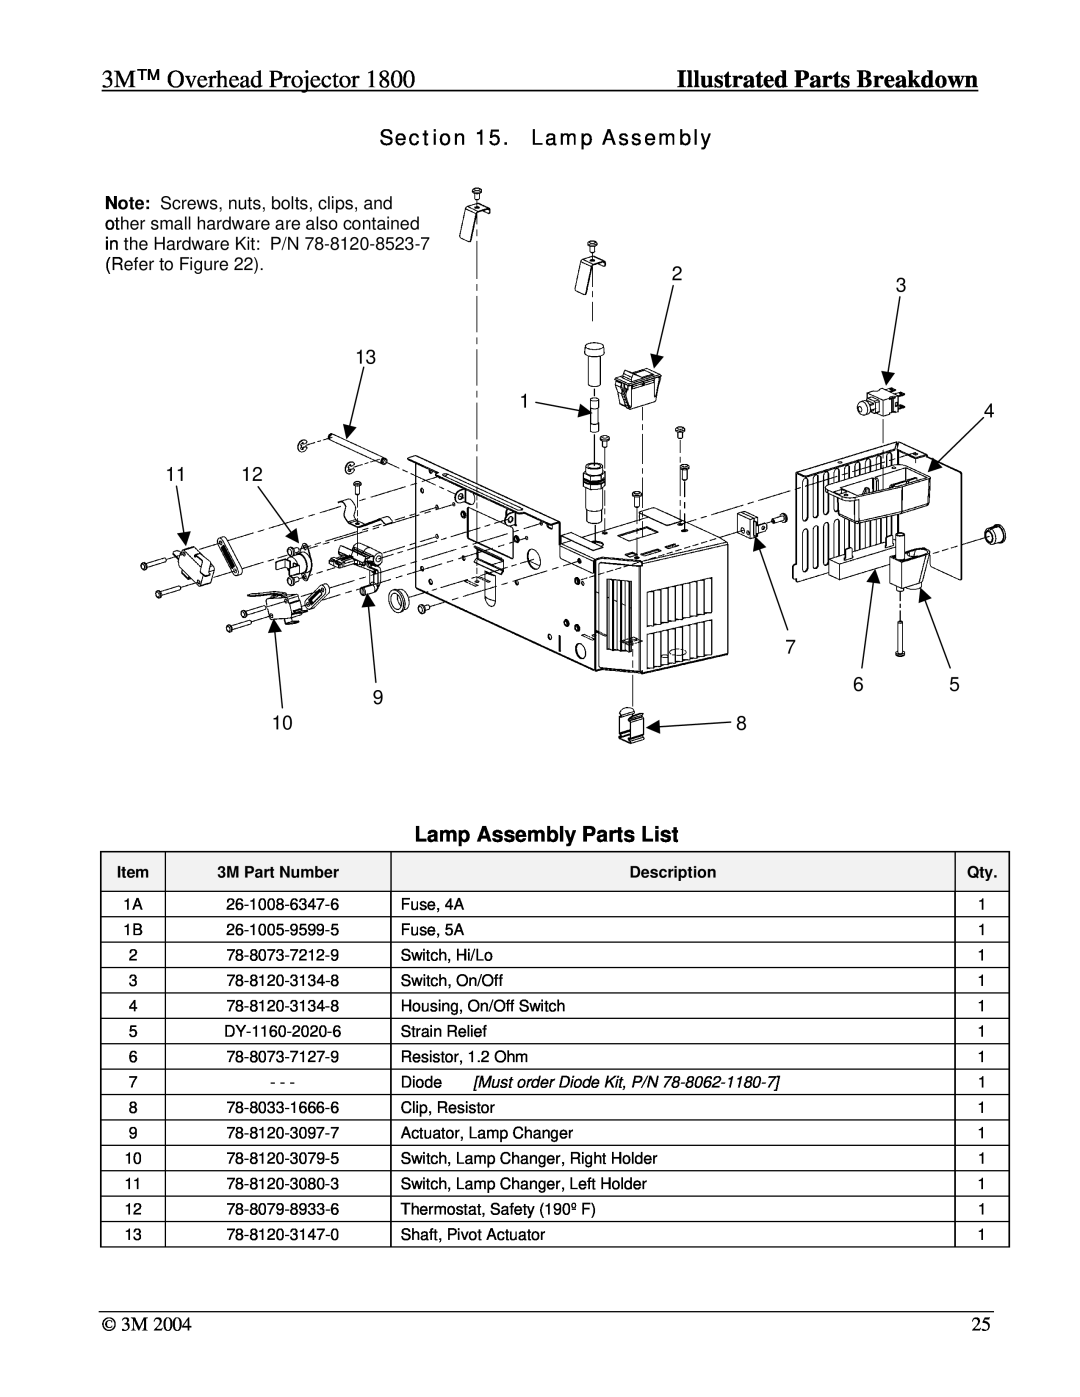 3M 1800 manual Lamp Assembly Parts List, 3M Overhead Projector, Illustrated Parts Breakdown, Refer to Figure 